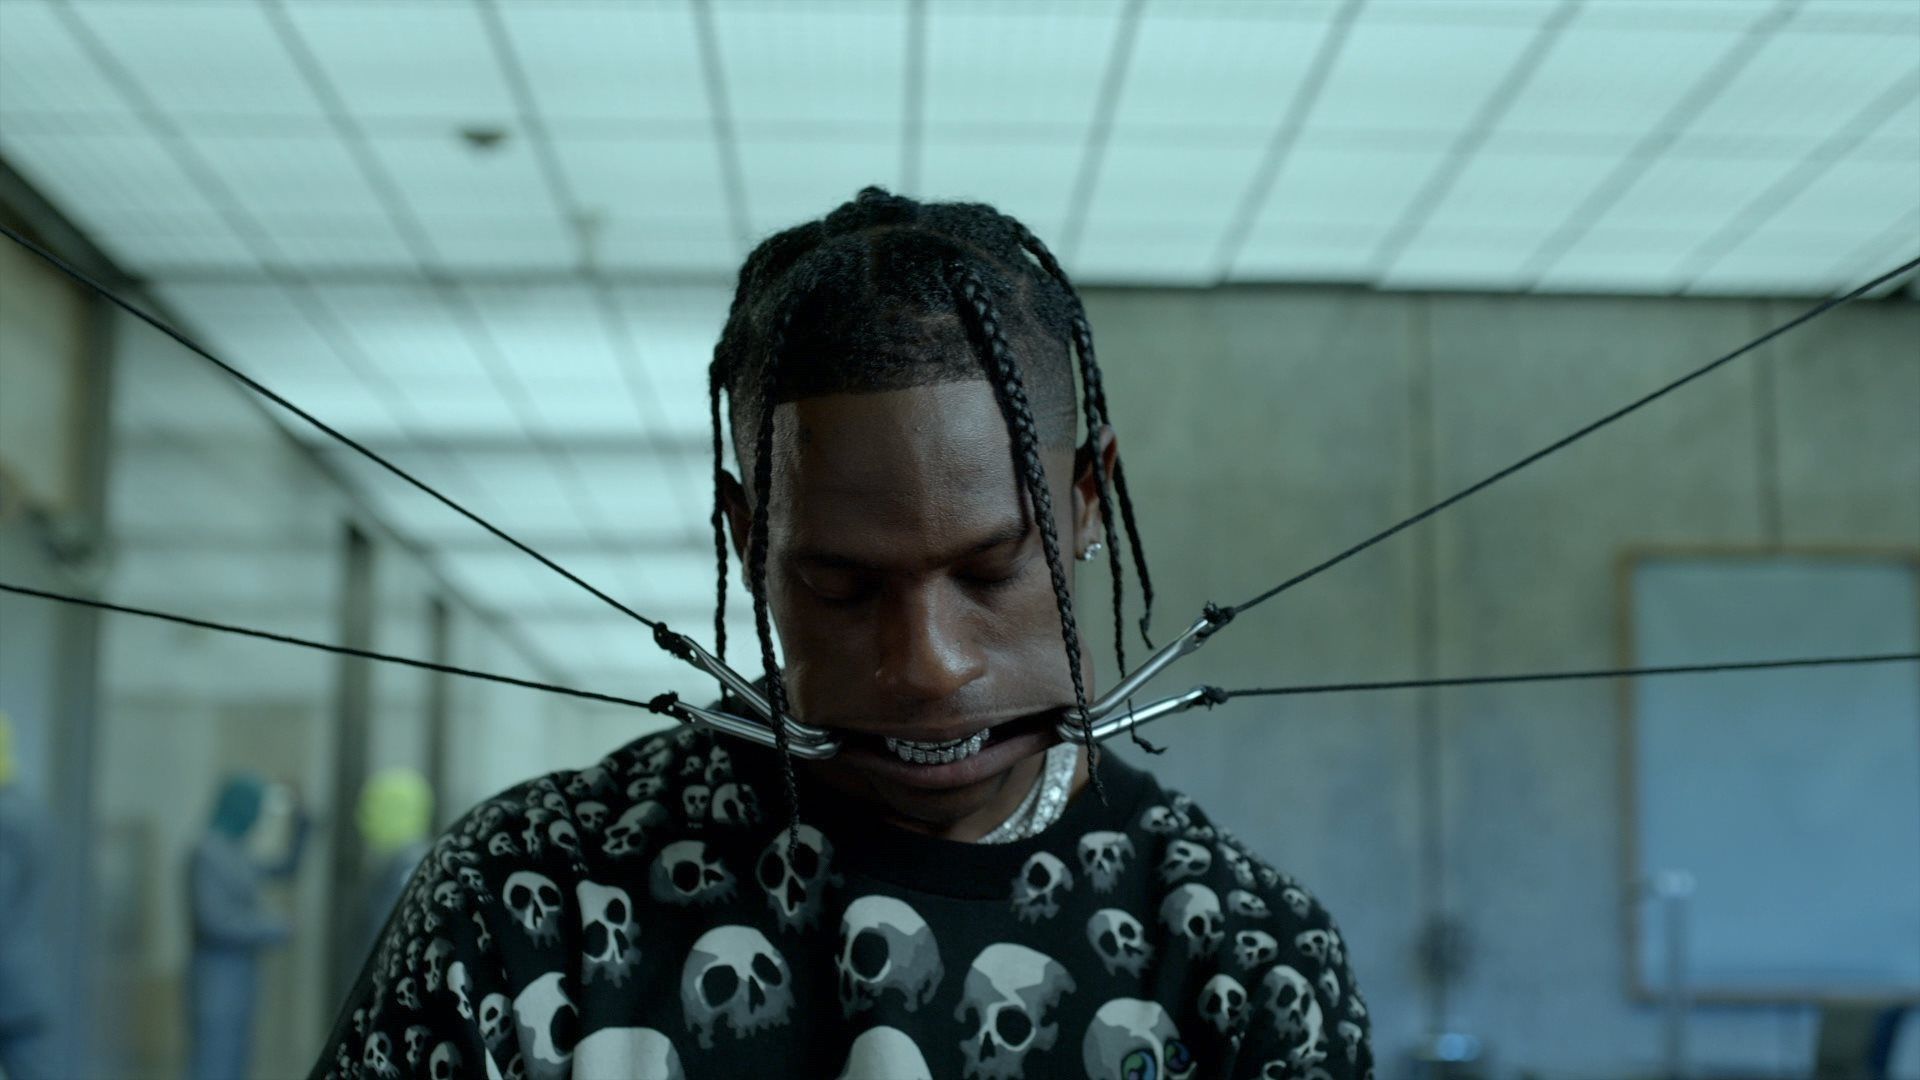 POP NEWS: Travis Scott drops HIGHEST IN THE ROOM with visionary